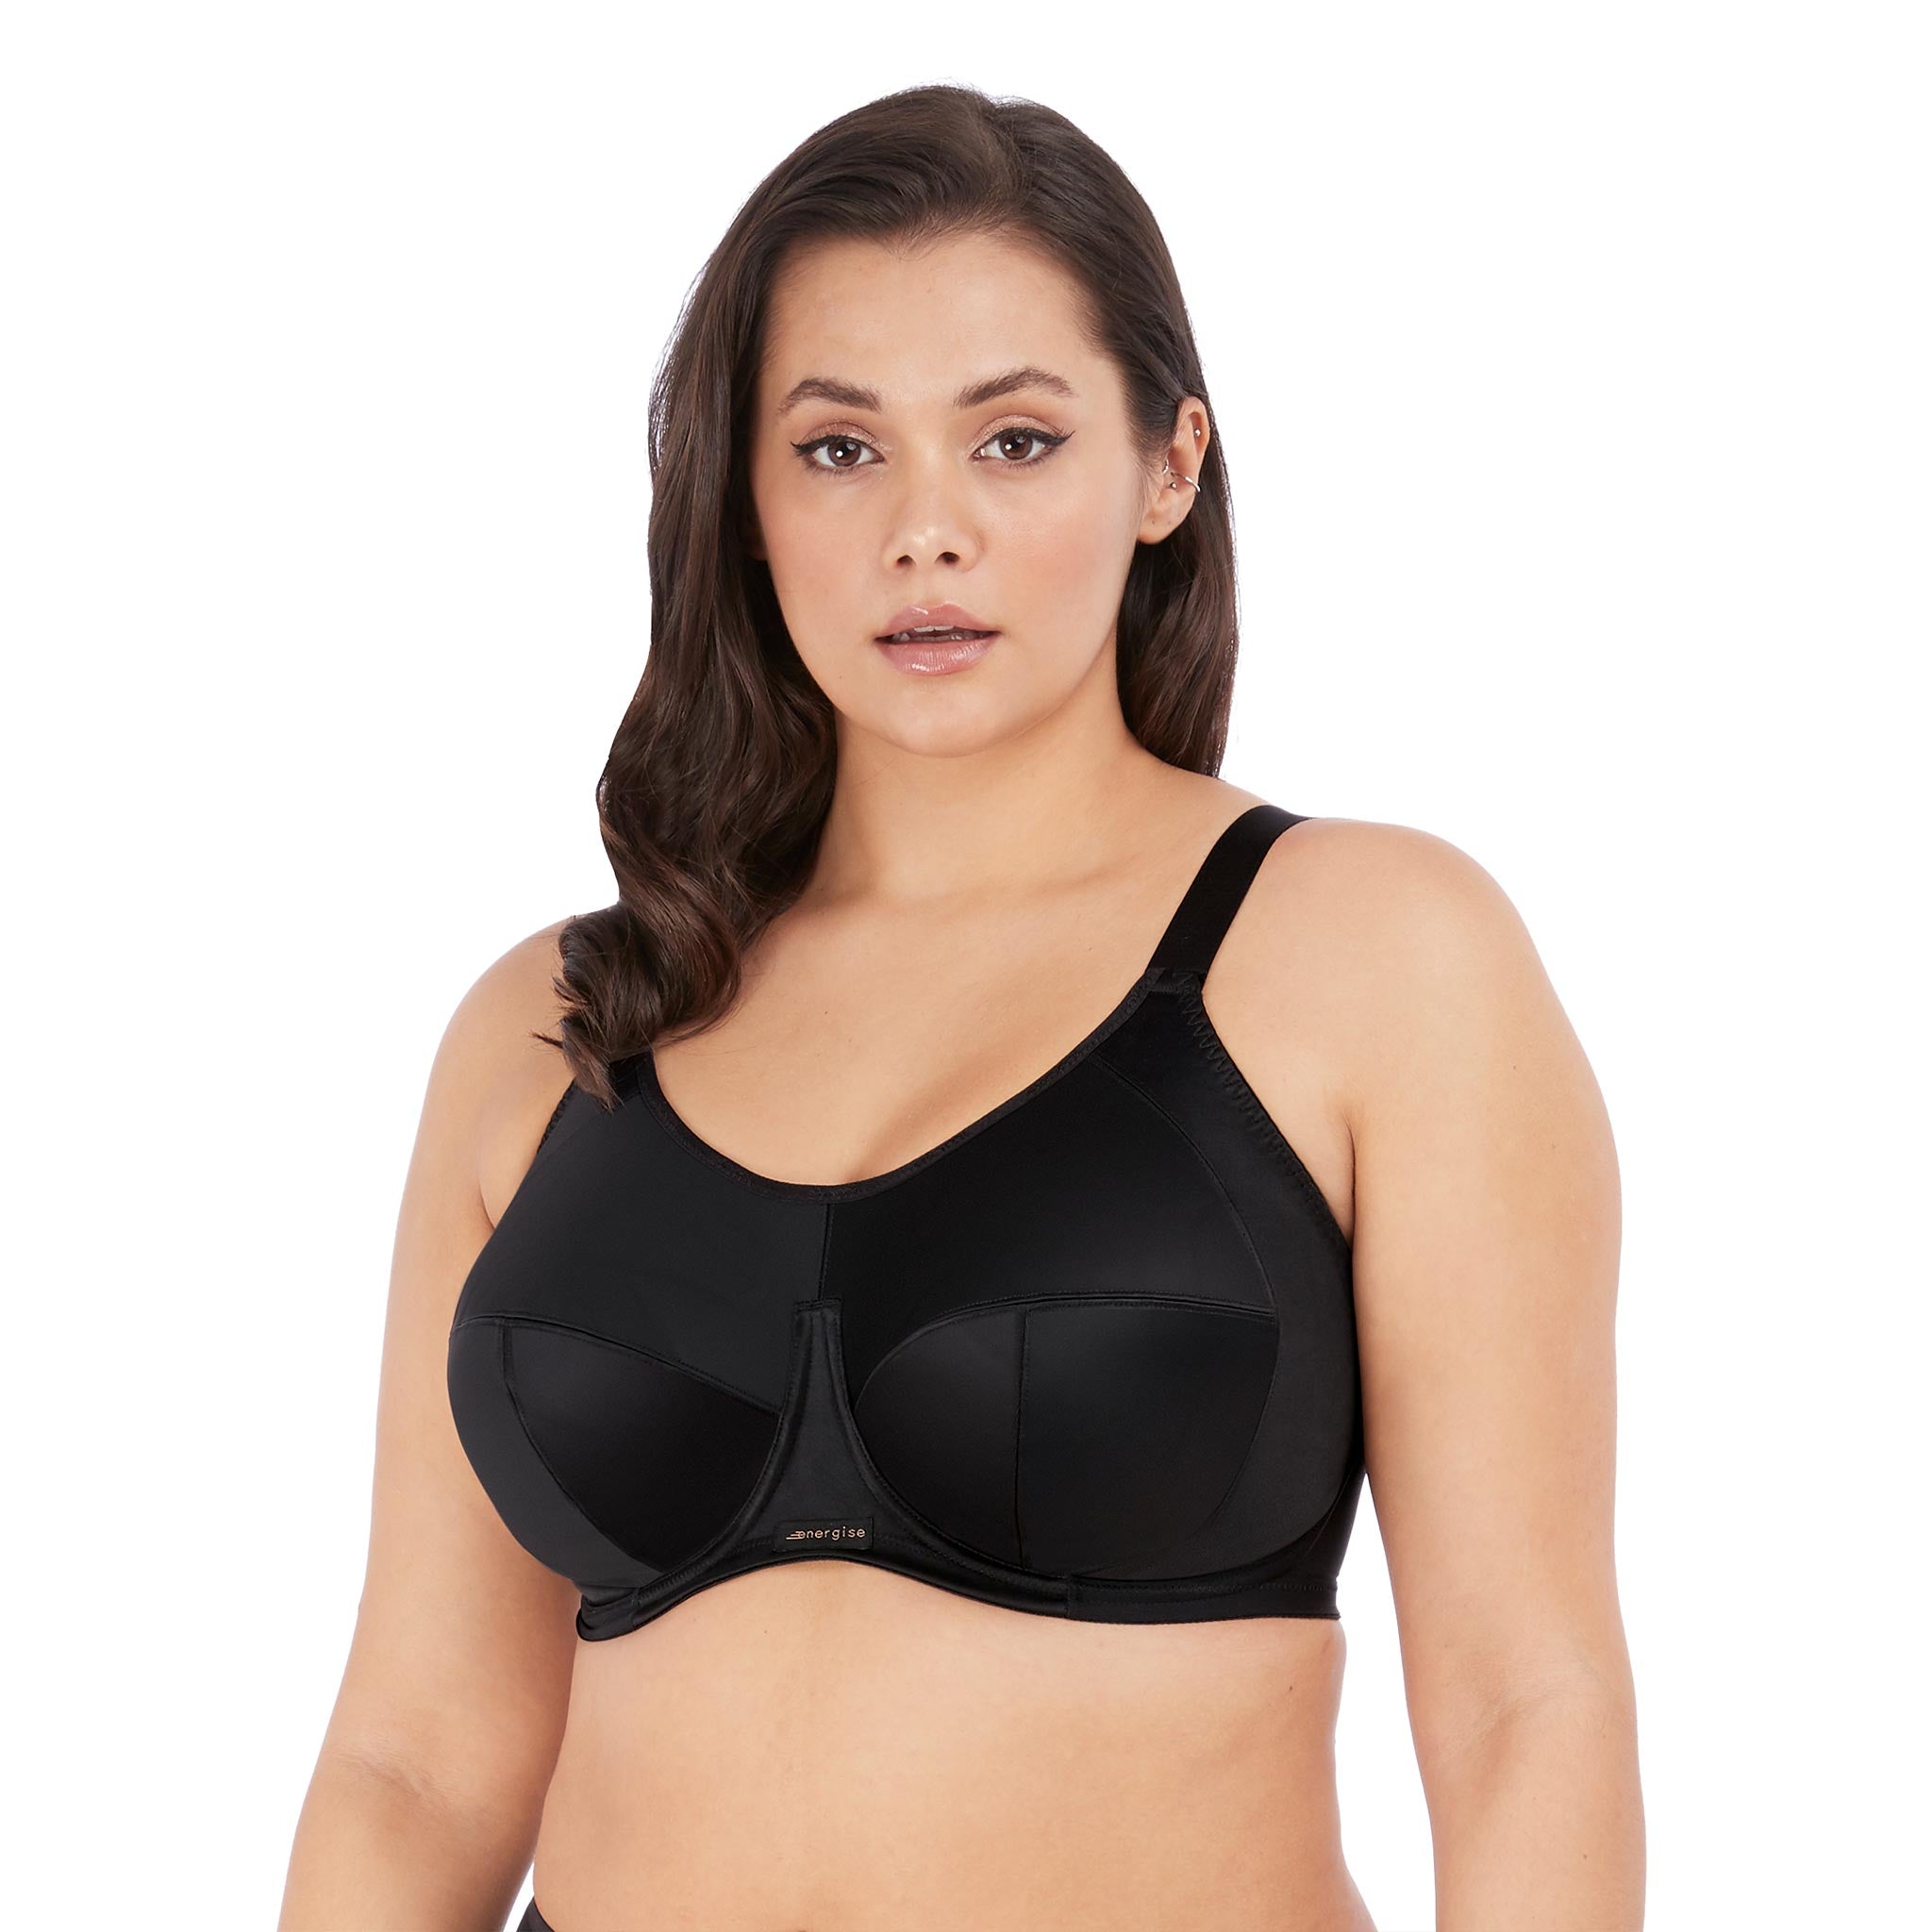 The Lemedy Sports Bra is on sale for Prime Day 2022